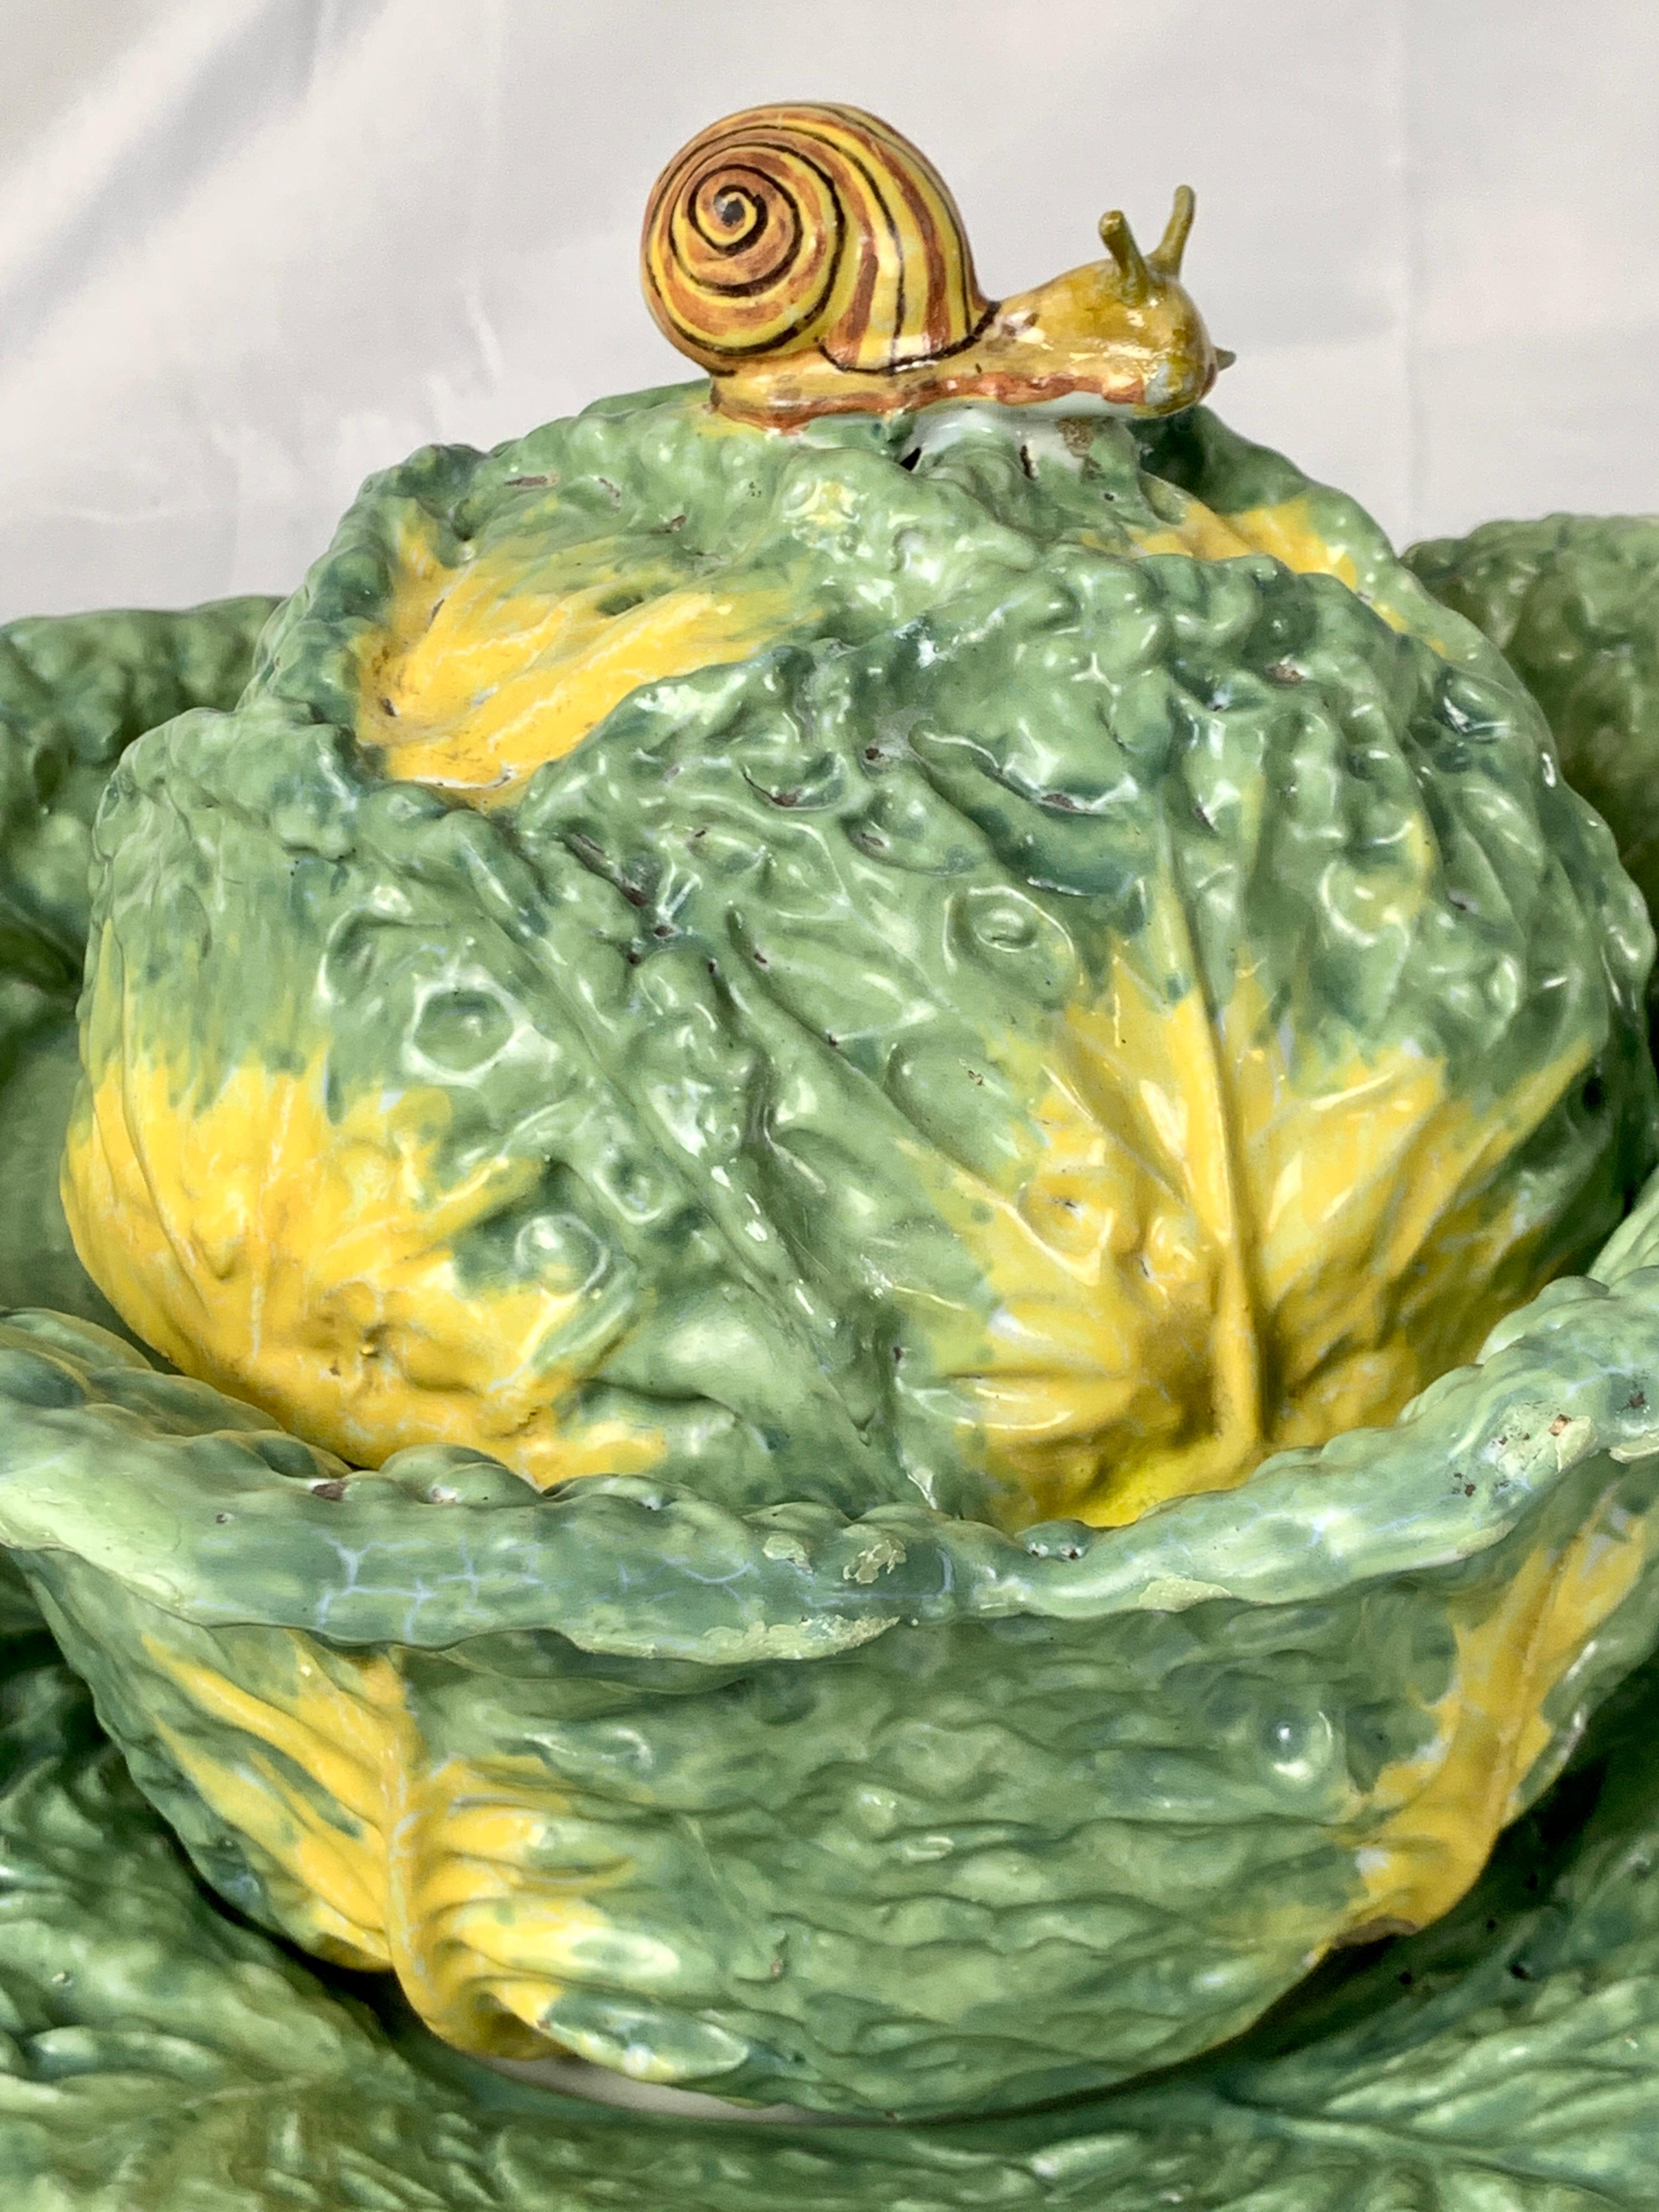 This faience soup tureen was made in the Philippe Mombaers factory in Brussels circa 1765. The cabbage tureen, its cover, and the stand are painted in green tones with yellow highlights. 
The color combination is exquisite!
The tureen is a gem of